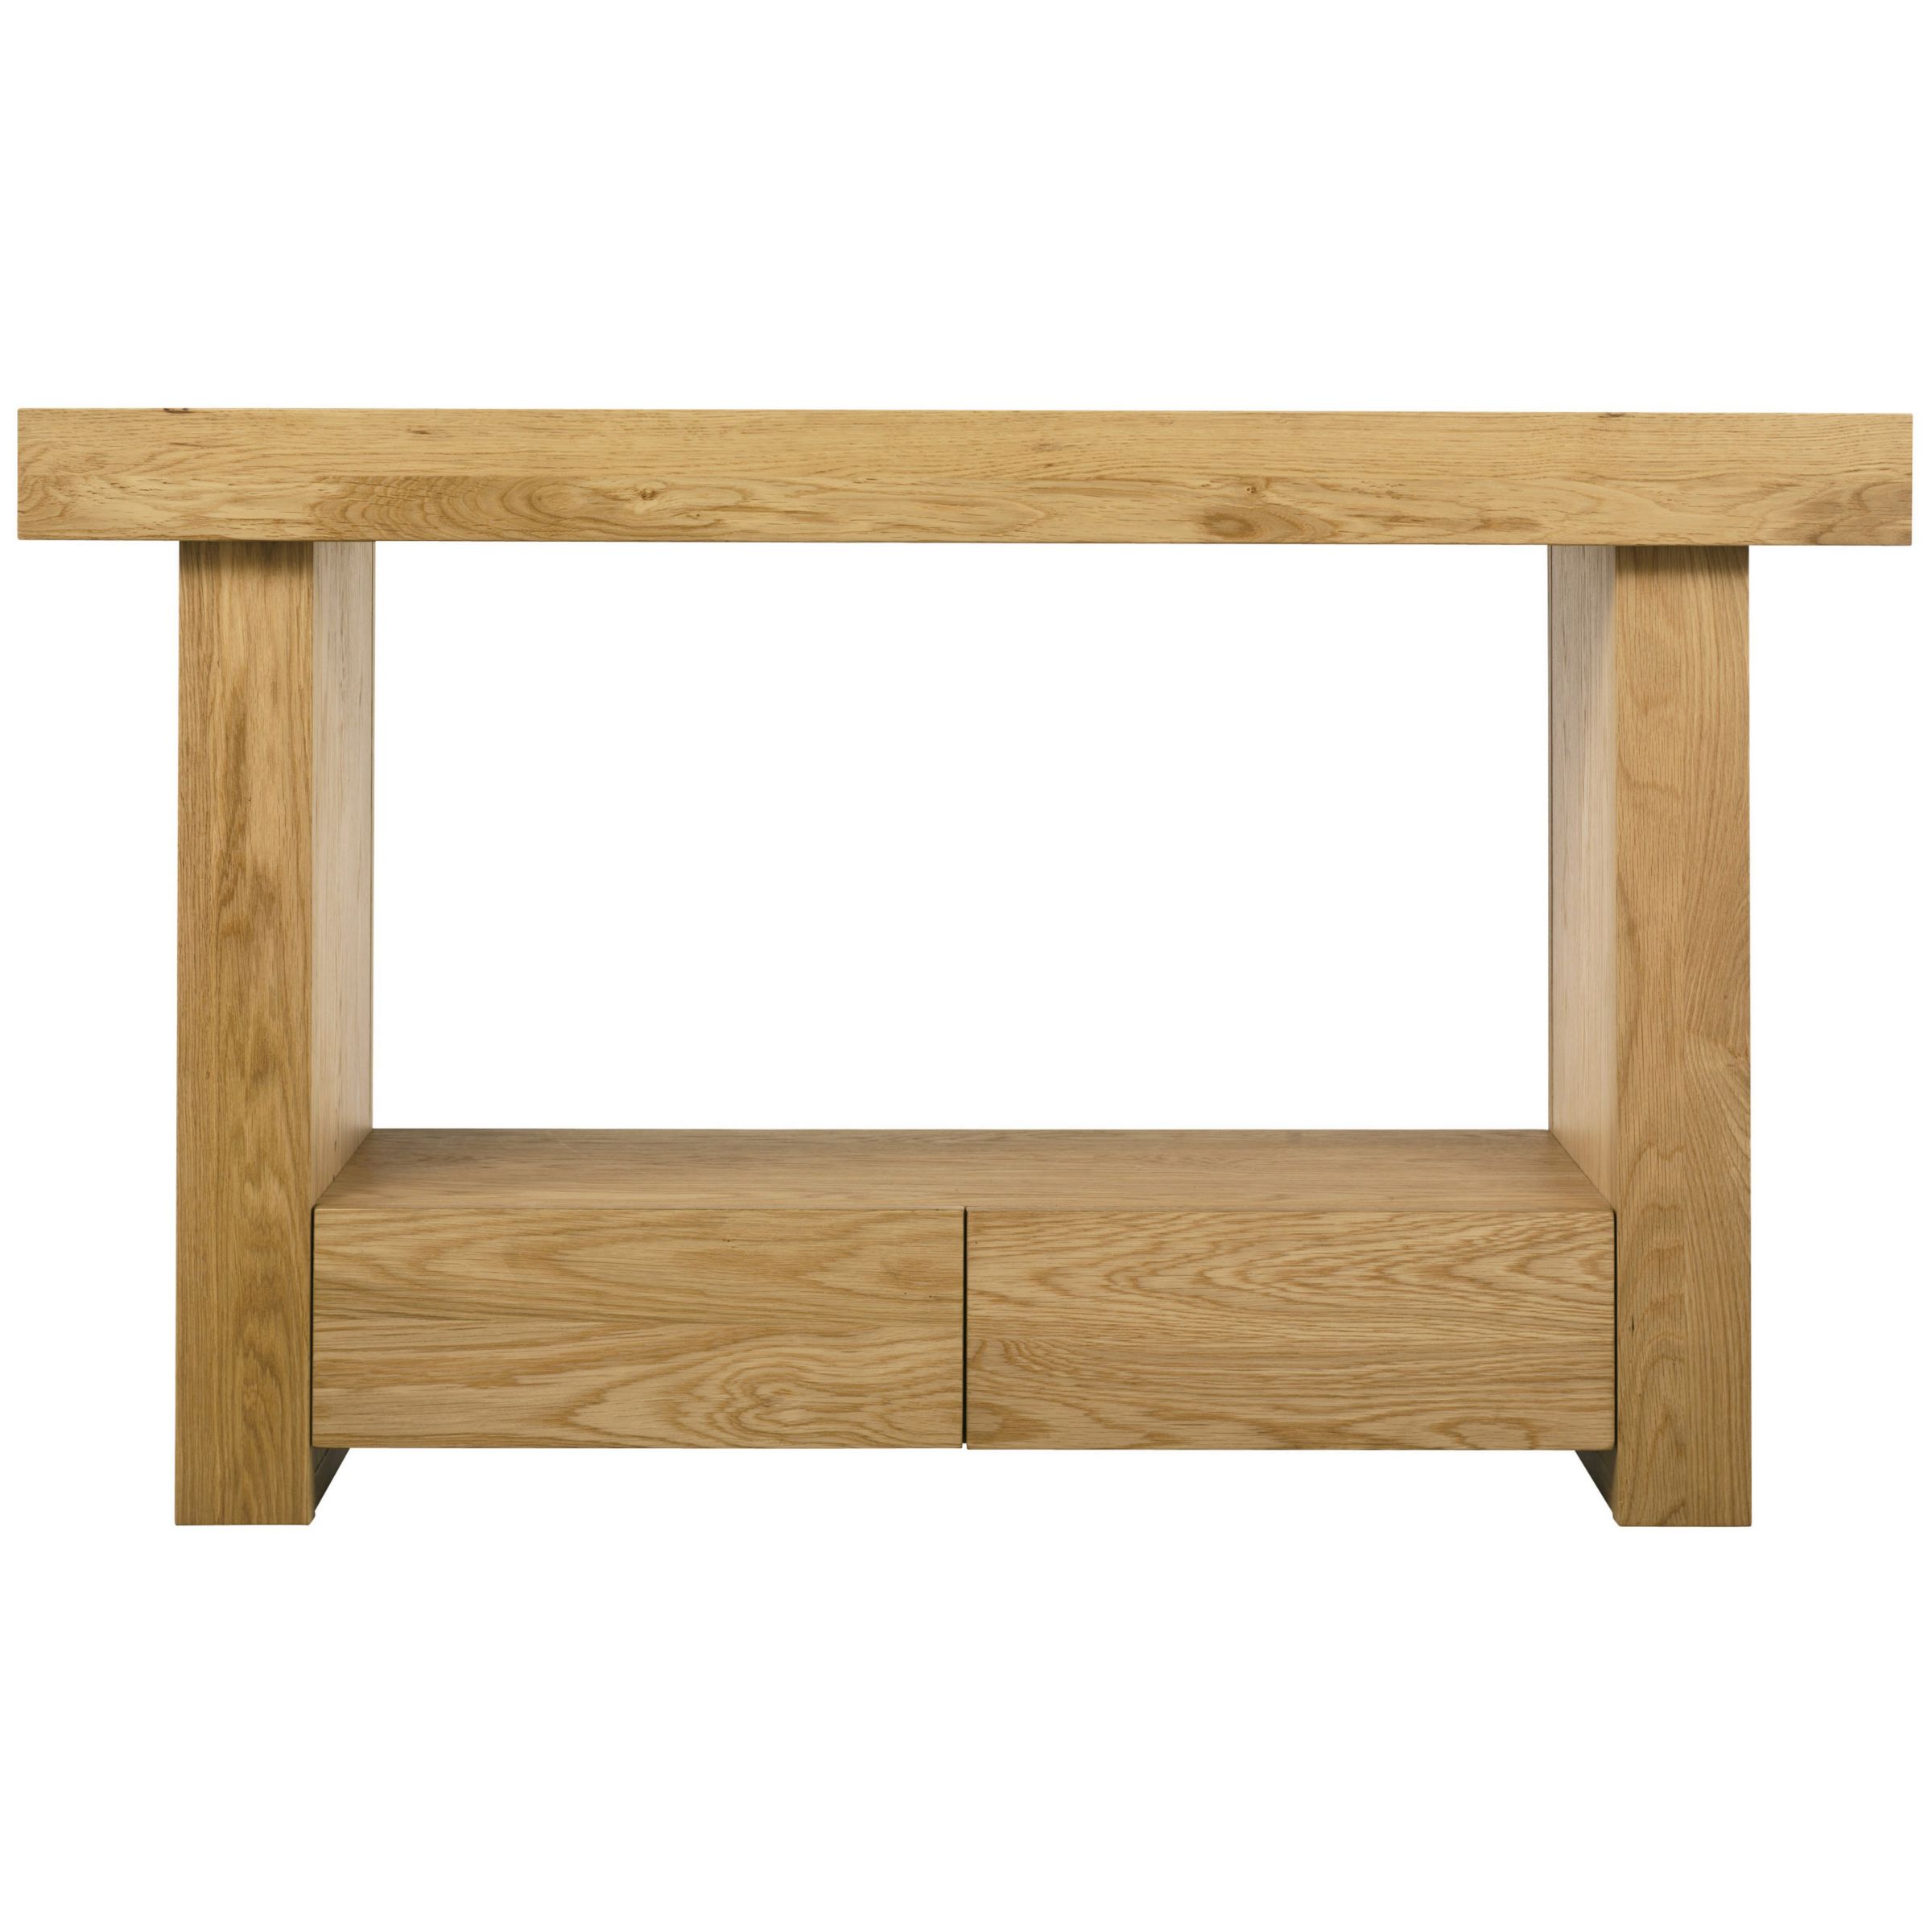 John Lewis Summit Console Table